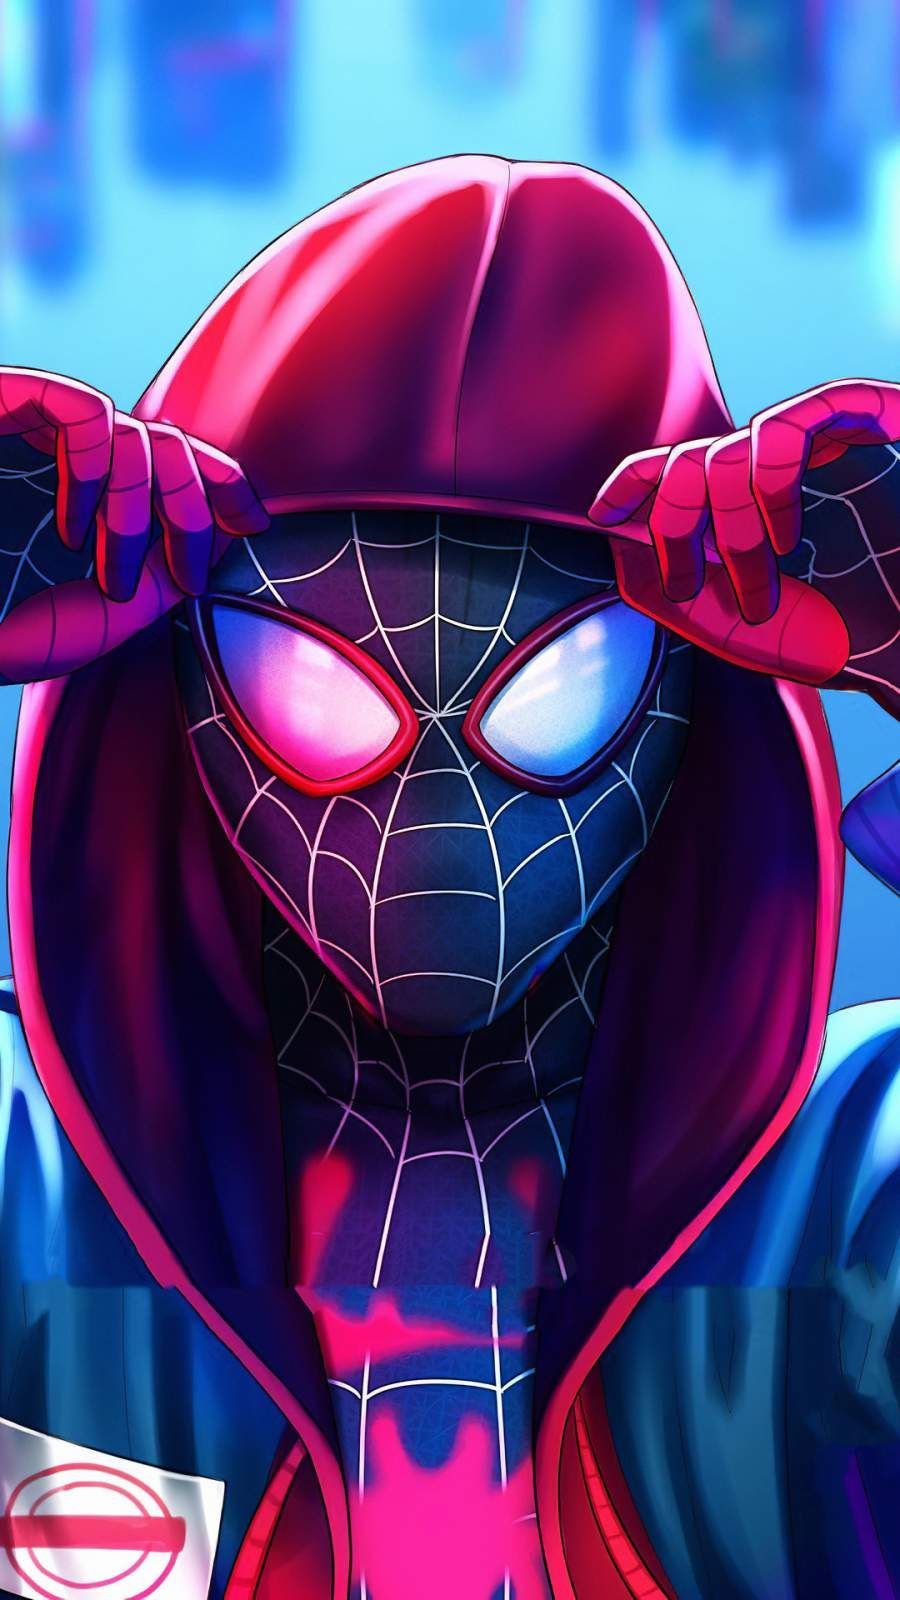 iPhone Wallpaper for iPhone iPhone 8 Plus, iPhone 6s, iPhone 6s Plus, iPhone X and iPod Touch High. Spiderman artwork, Spiderman art, Marvel superhero posters